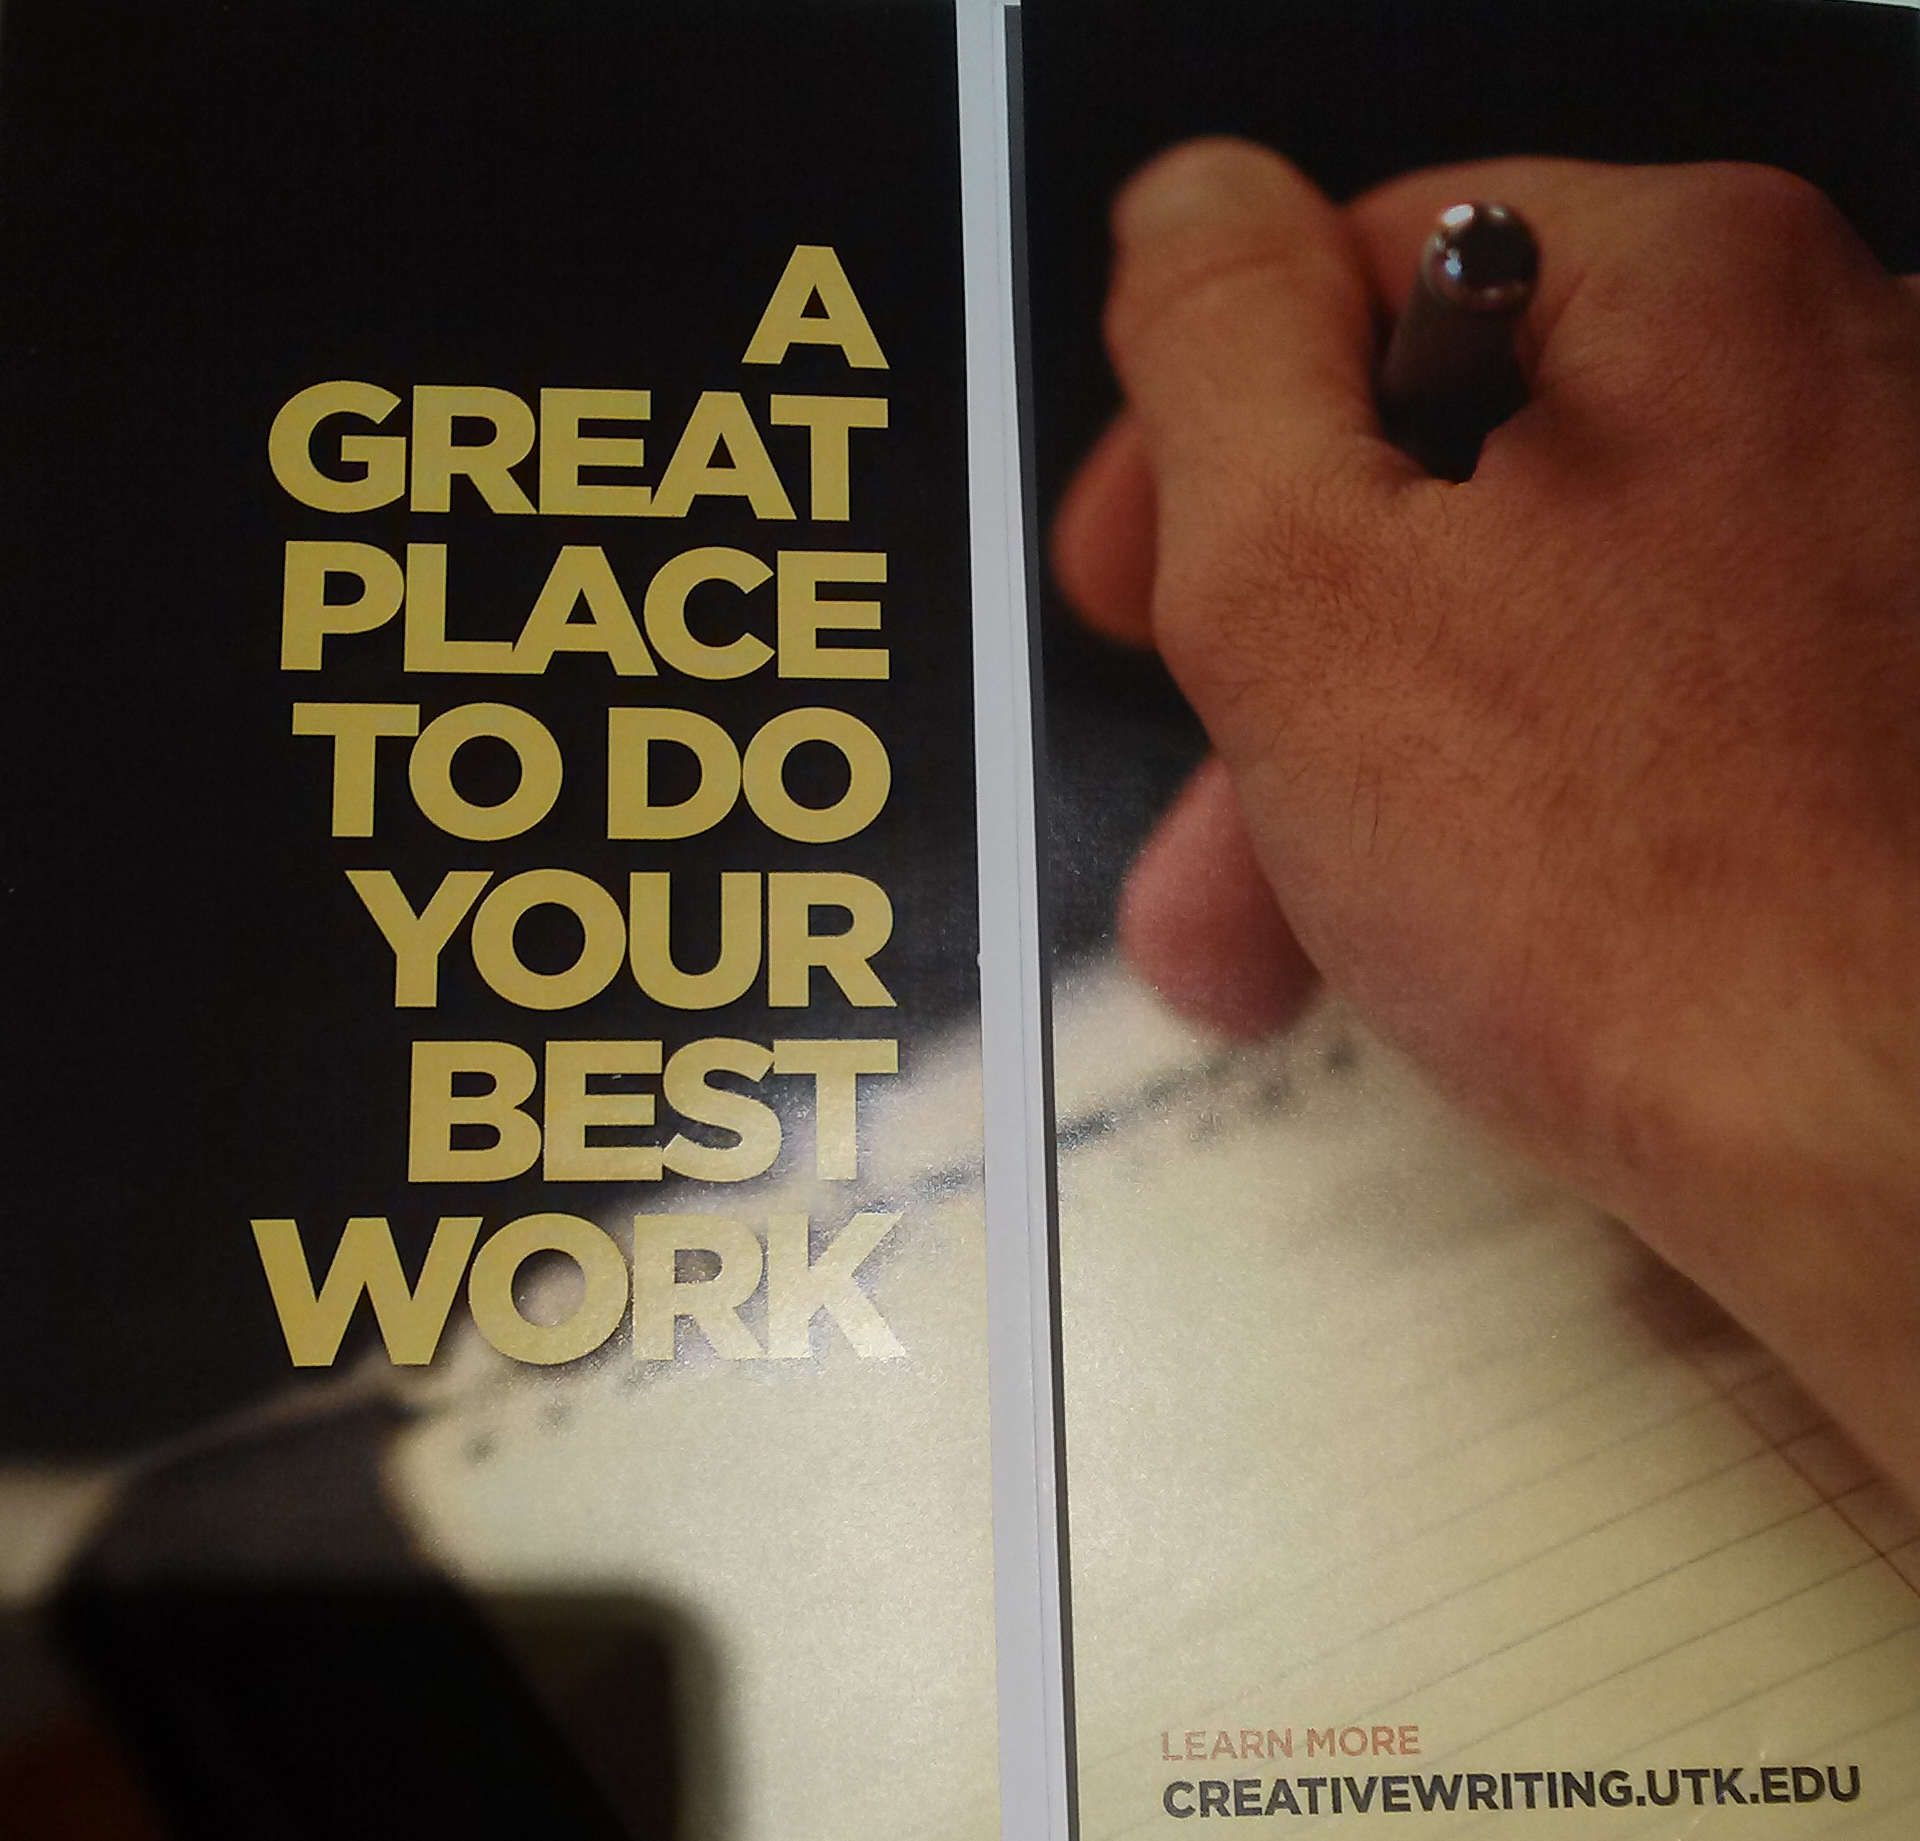 A trifold pamphlet produced as marketing for UTK's MFA in Writing program, showing the author's right hand holding a pen, next to the words 'A great place to do your best work'.